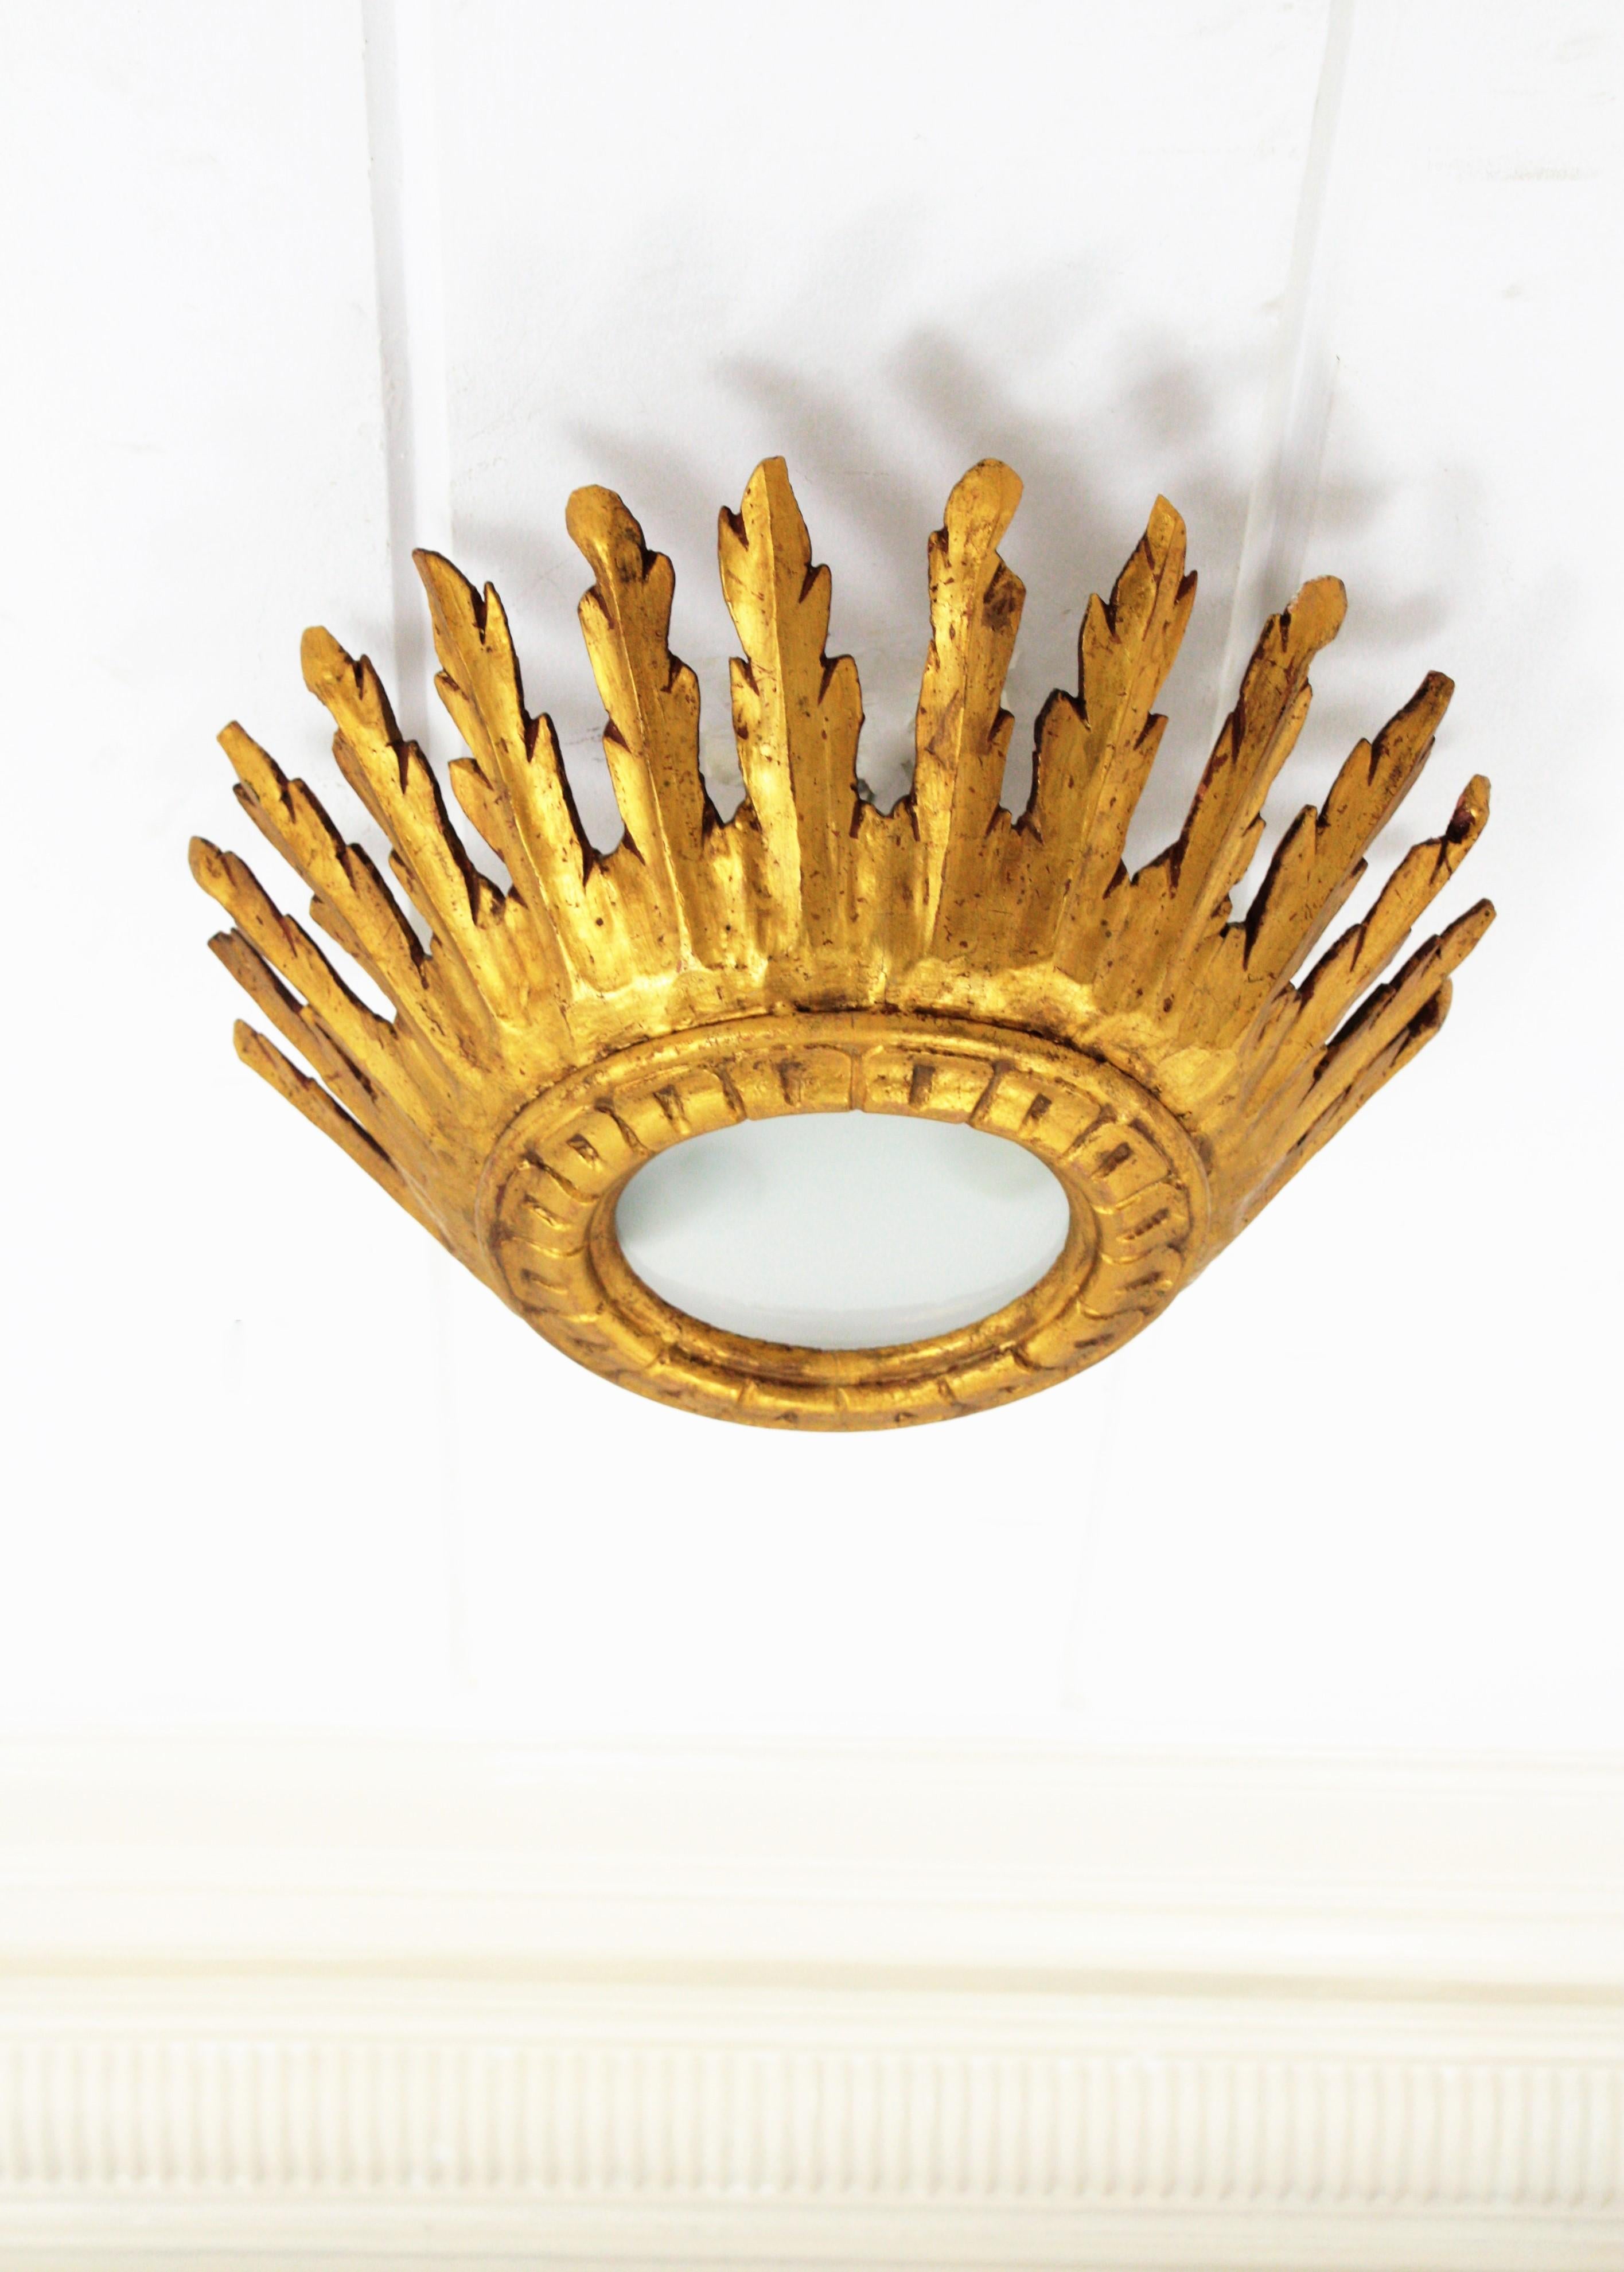 Wood Spanish Baroque Giltwood Crown Sunburst Ceiling Light Fixture with Frosted Glass